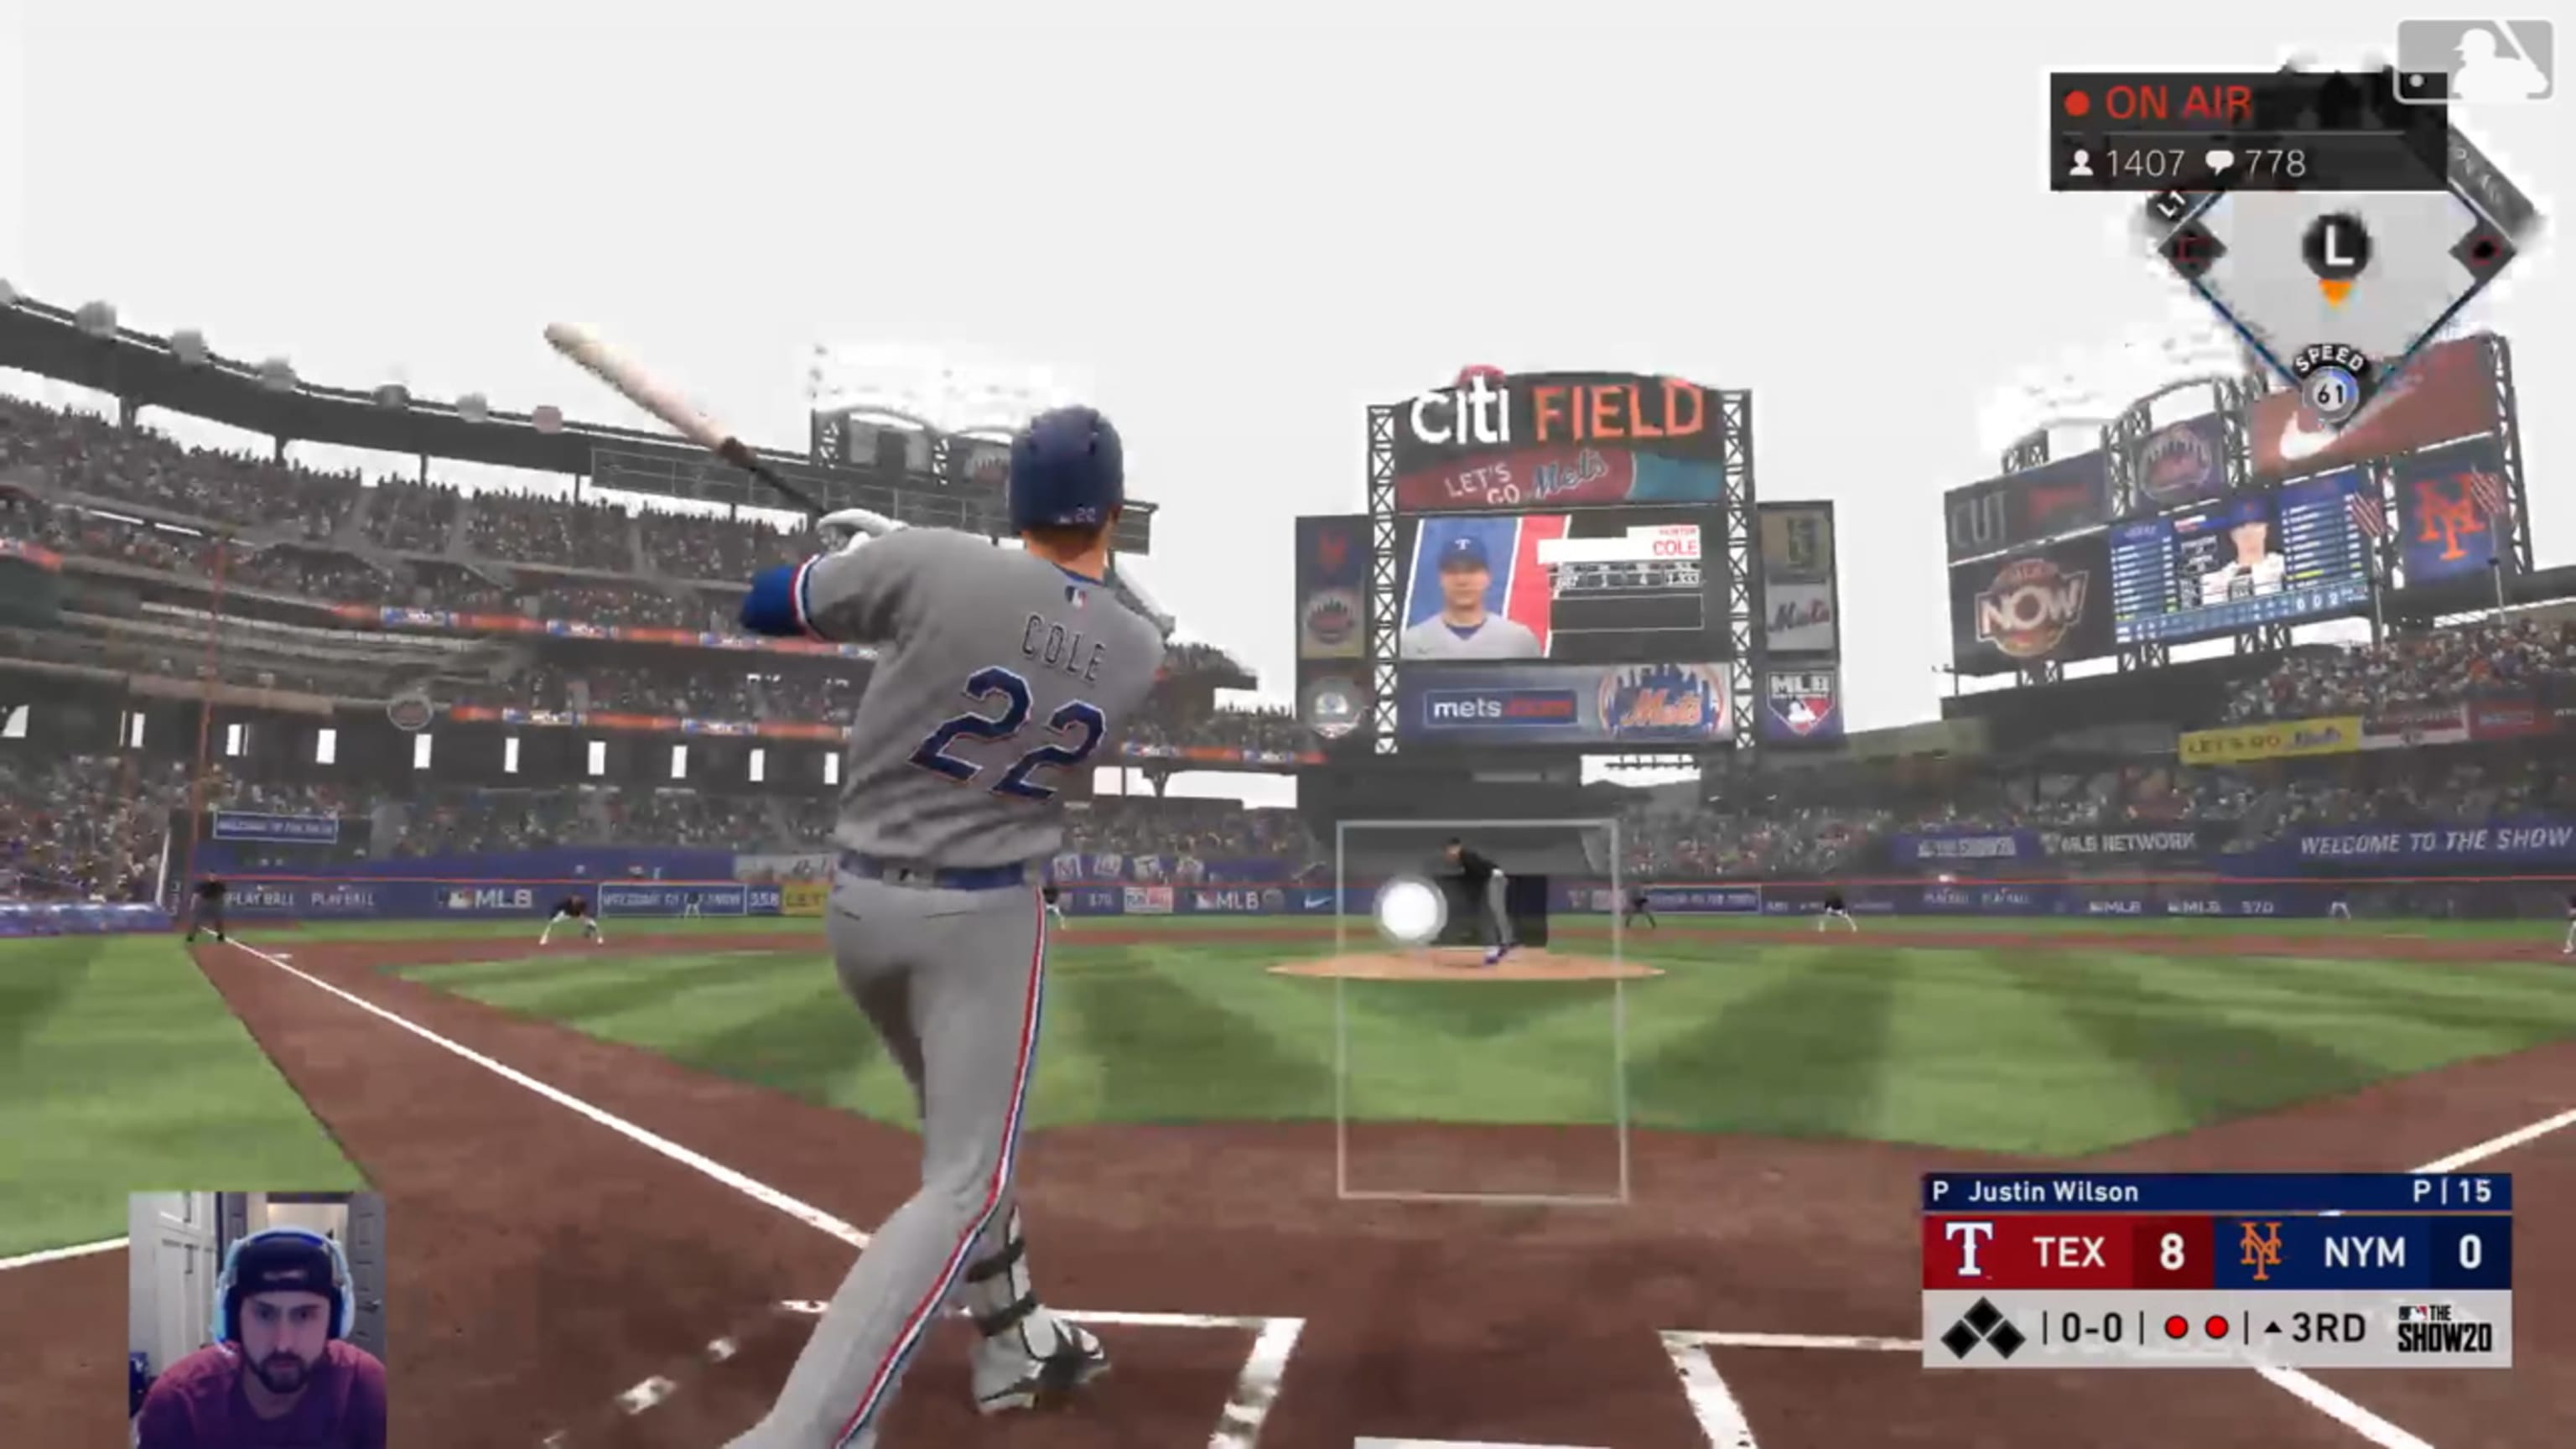 How to watch Joey Gallo via Twitch stream in MLB The Show 20 Players League  - DraftKings Network